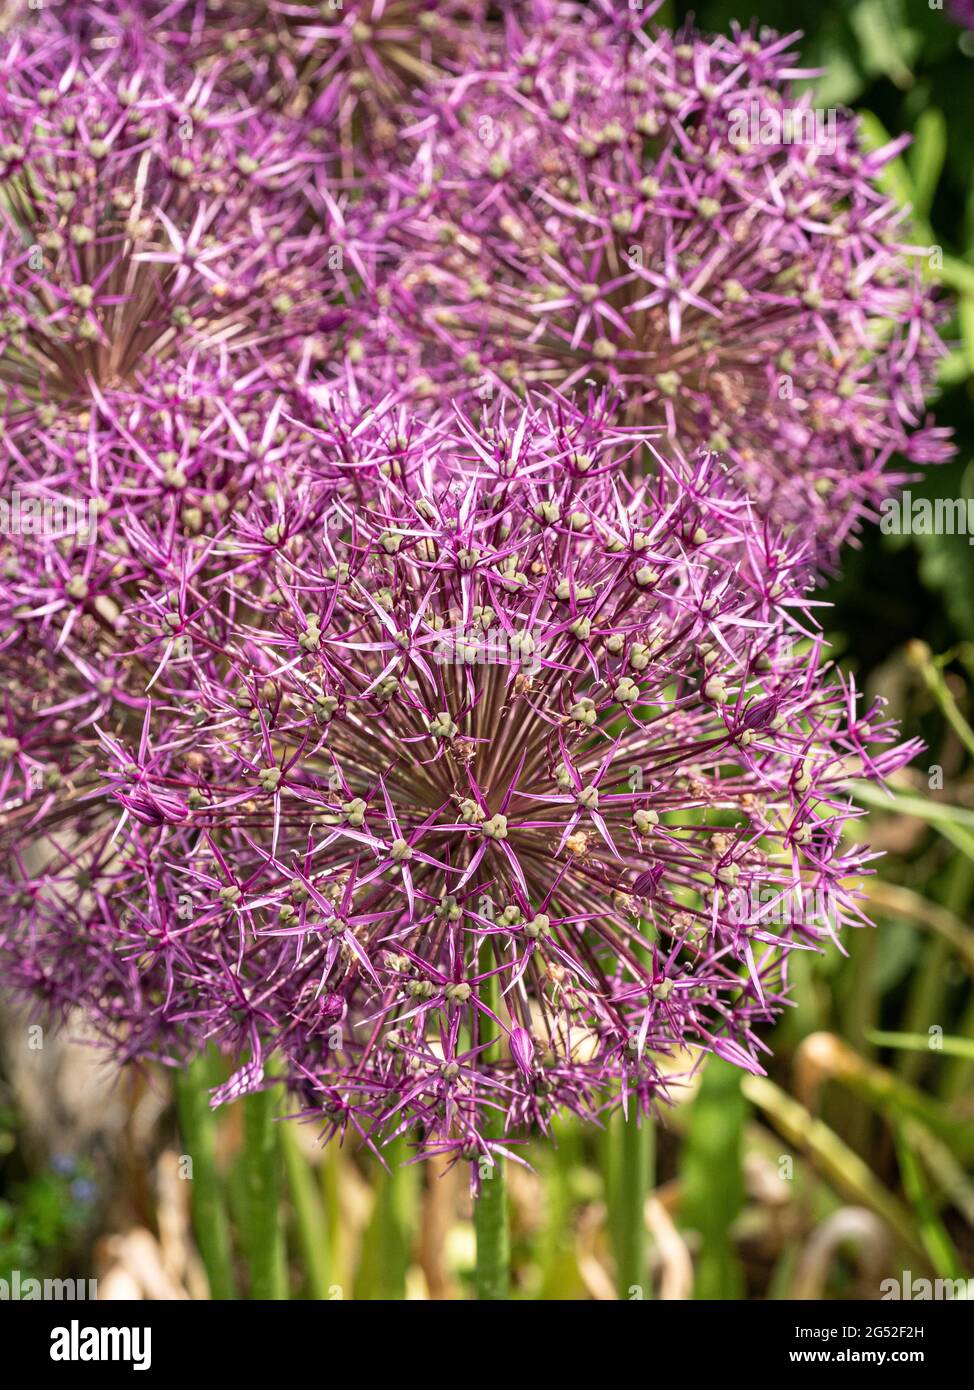 A close up of a group of the spherical purple flowerheads of the Allium Purple Rain Stock Photo